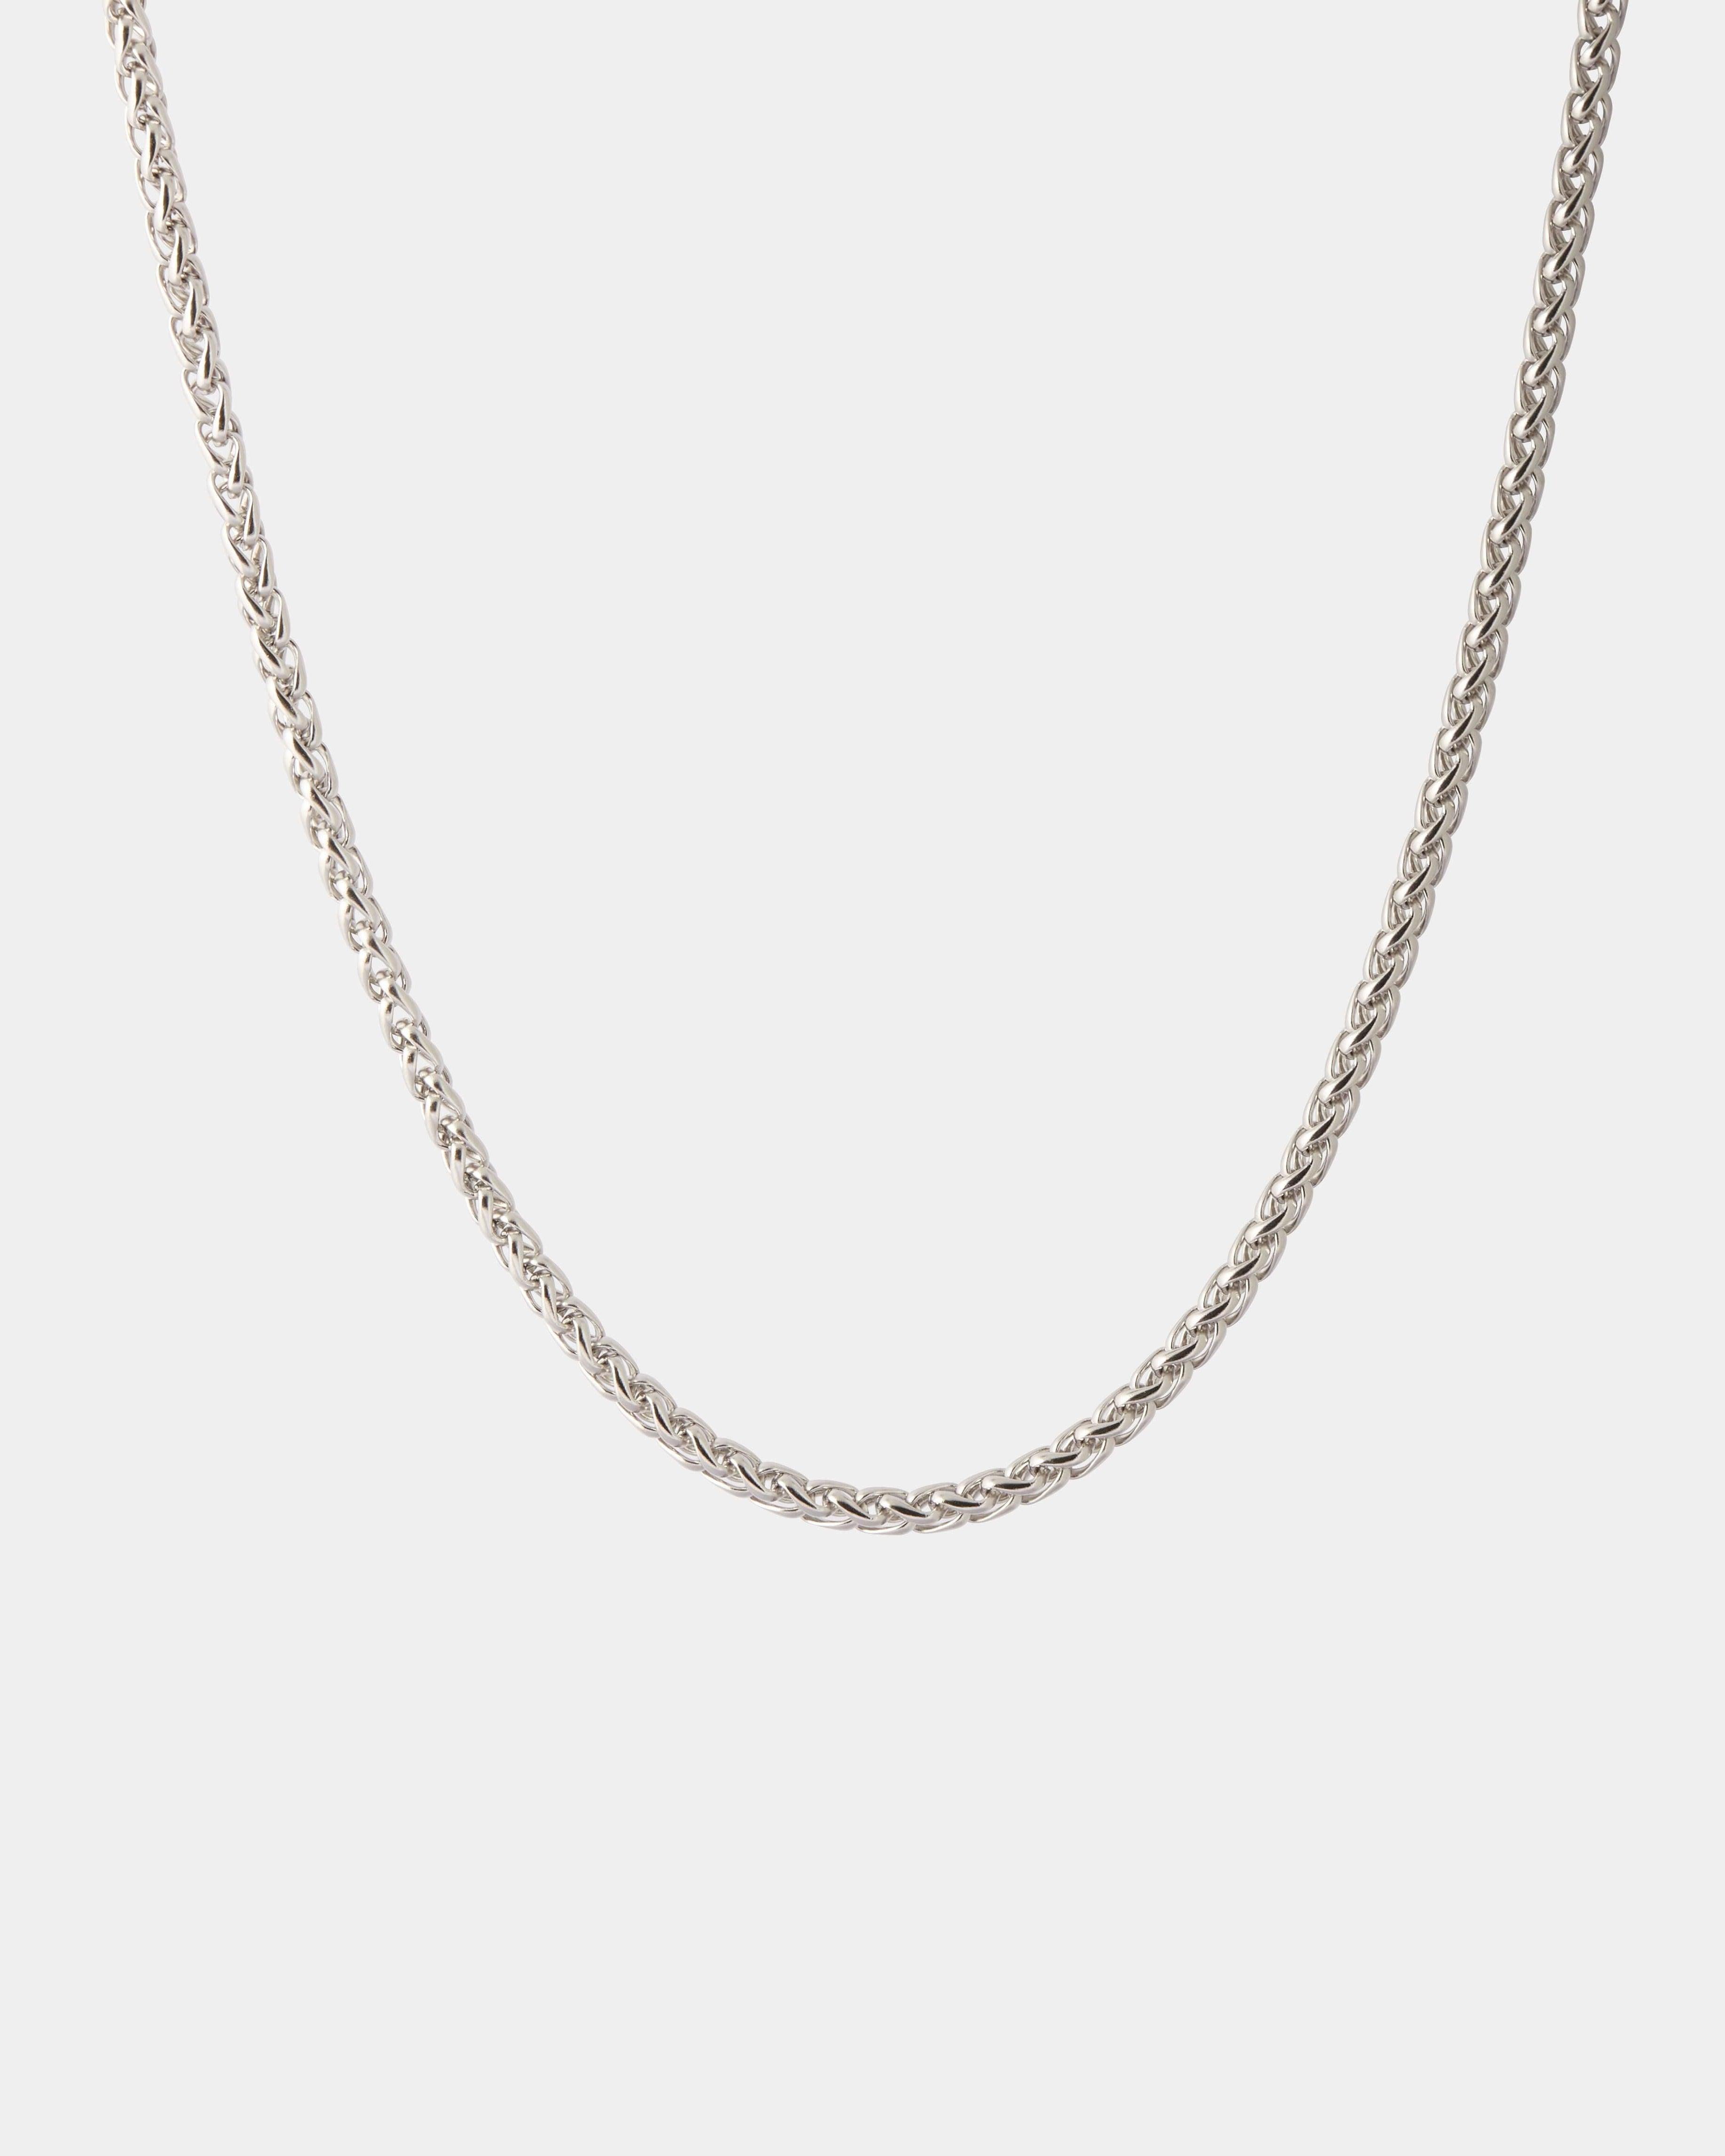 SPIKE CHAIN NECKLACE